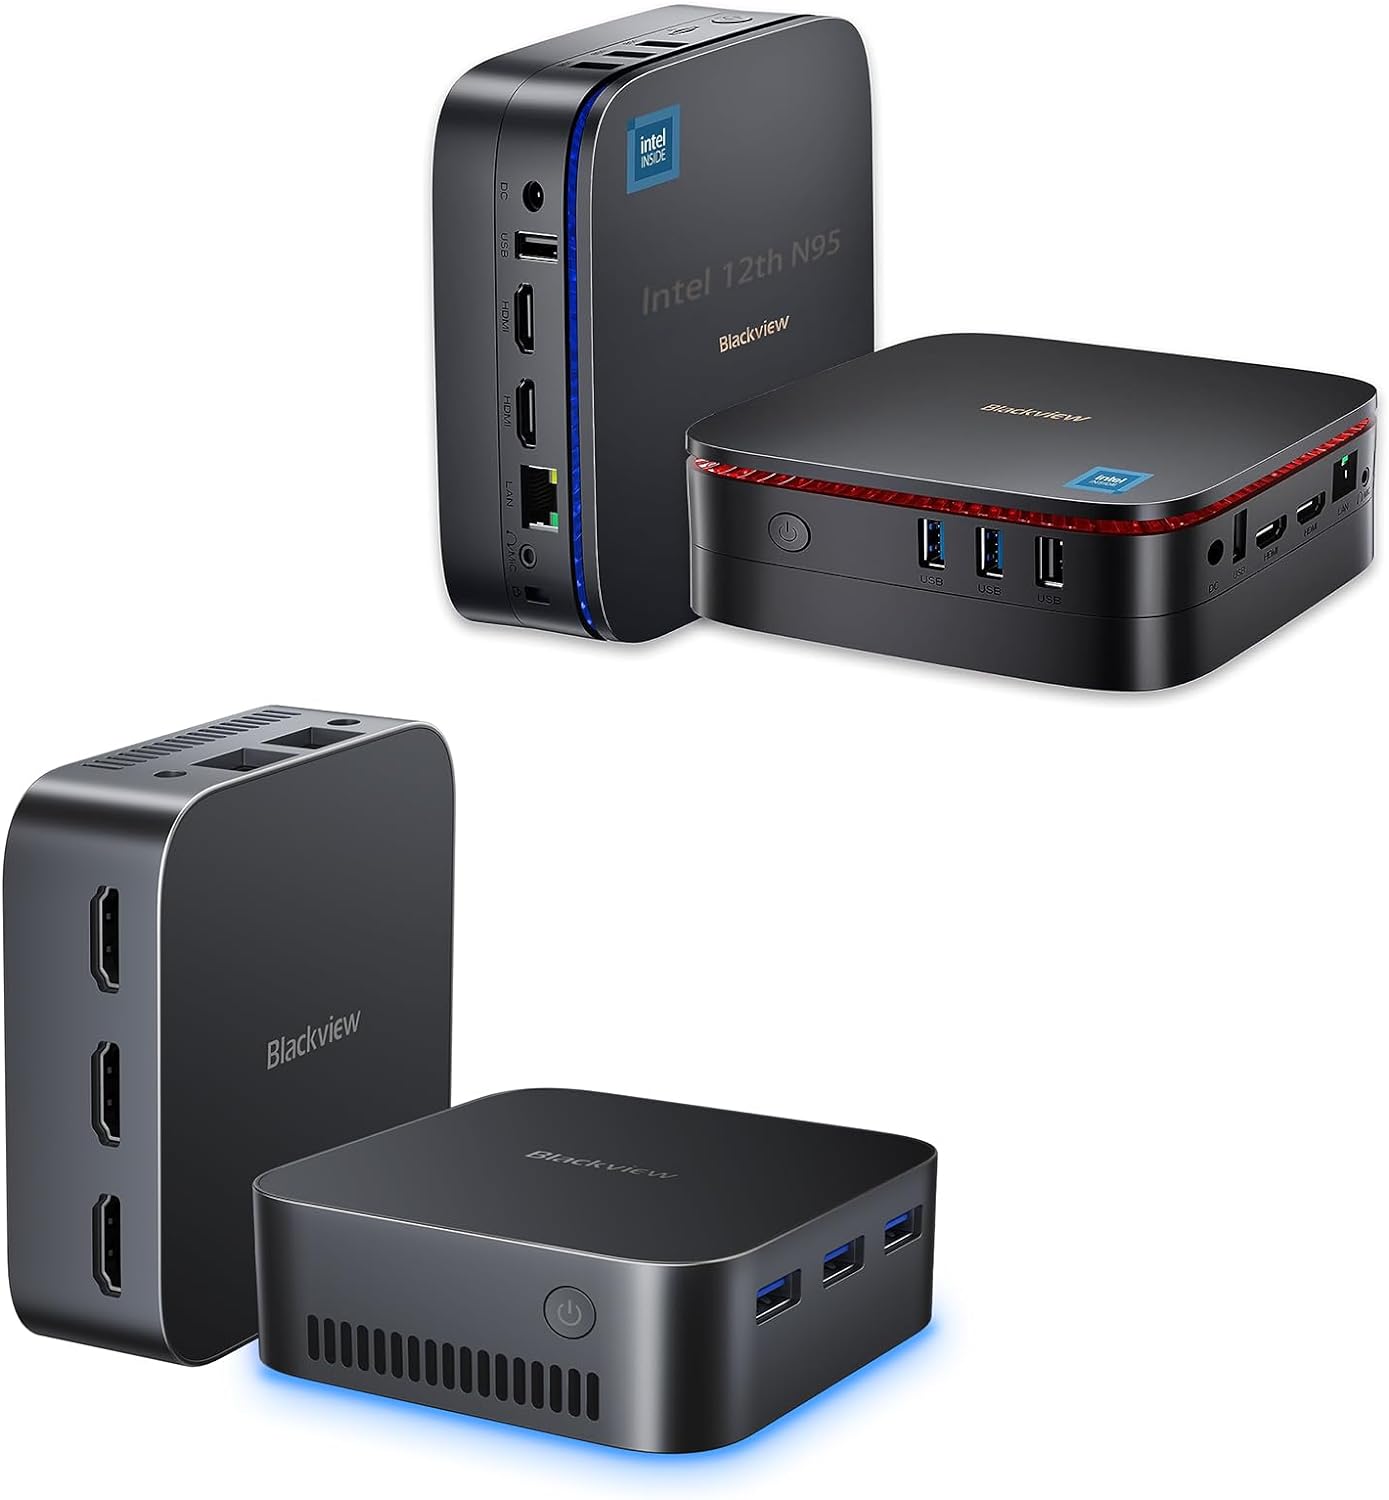 Blackview MP80 Mini PC Intel 12th N95(up to 3.4GHz) MP60 Mini PC Intel 12th N95(up to 3.4GHz)